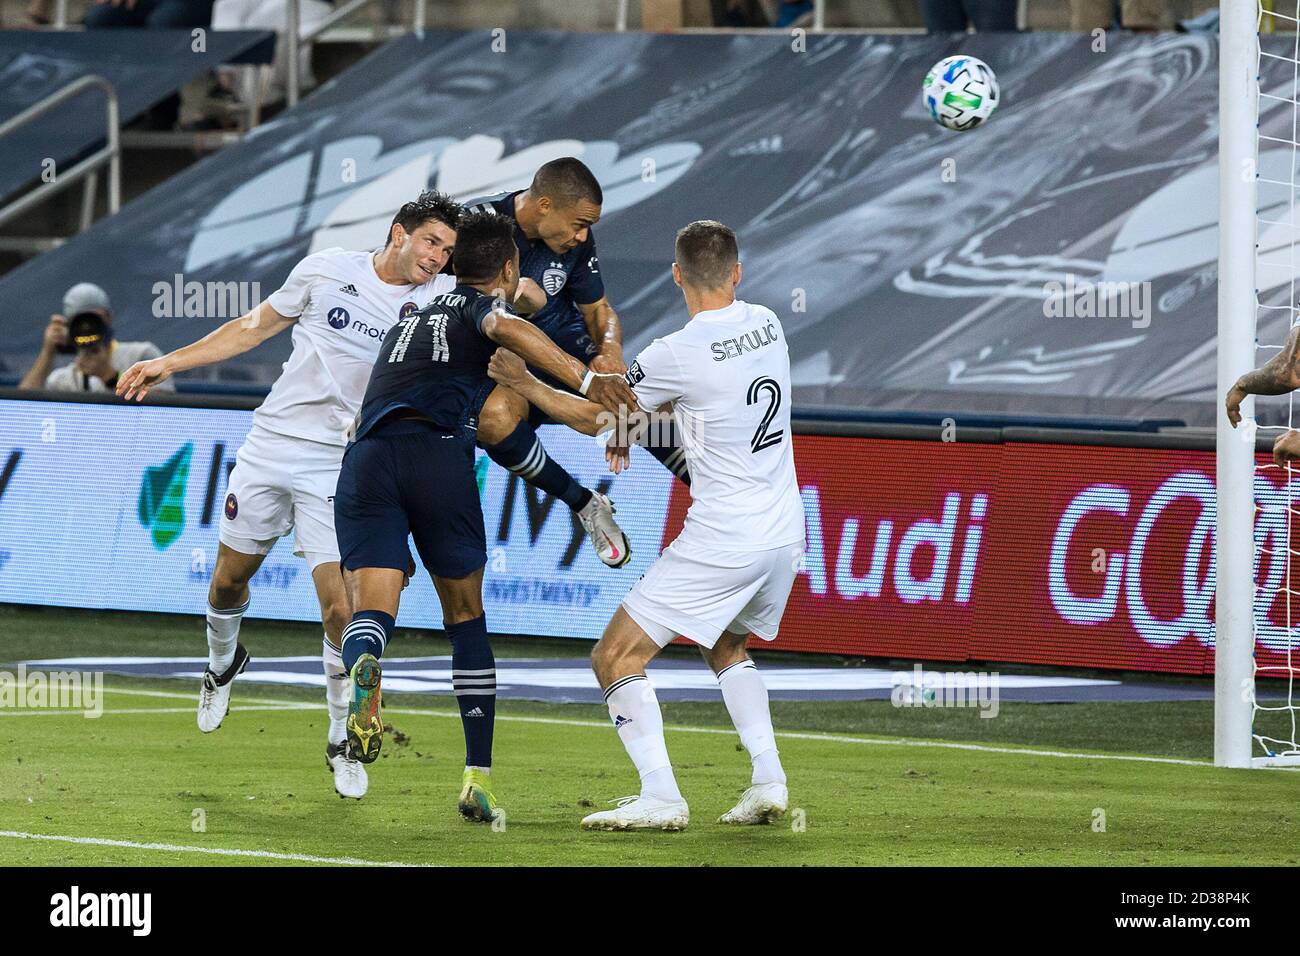 Kansas City, Kansas, USA. 13th Sep, 2020. Sporting KC defender Winston Reid #22 scores with a header shot during the second half of the game. At foreground (l-r) are Chicago Fire midfielder Brandt Bronico #13, Sporting KC midfielder Roger Espinoza #15, and Chicago Fire defender Boris Sekulic #2. Credit: Serena S.Y. Hsu/ZUMA Wire/Alamy Live News Stock Photo